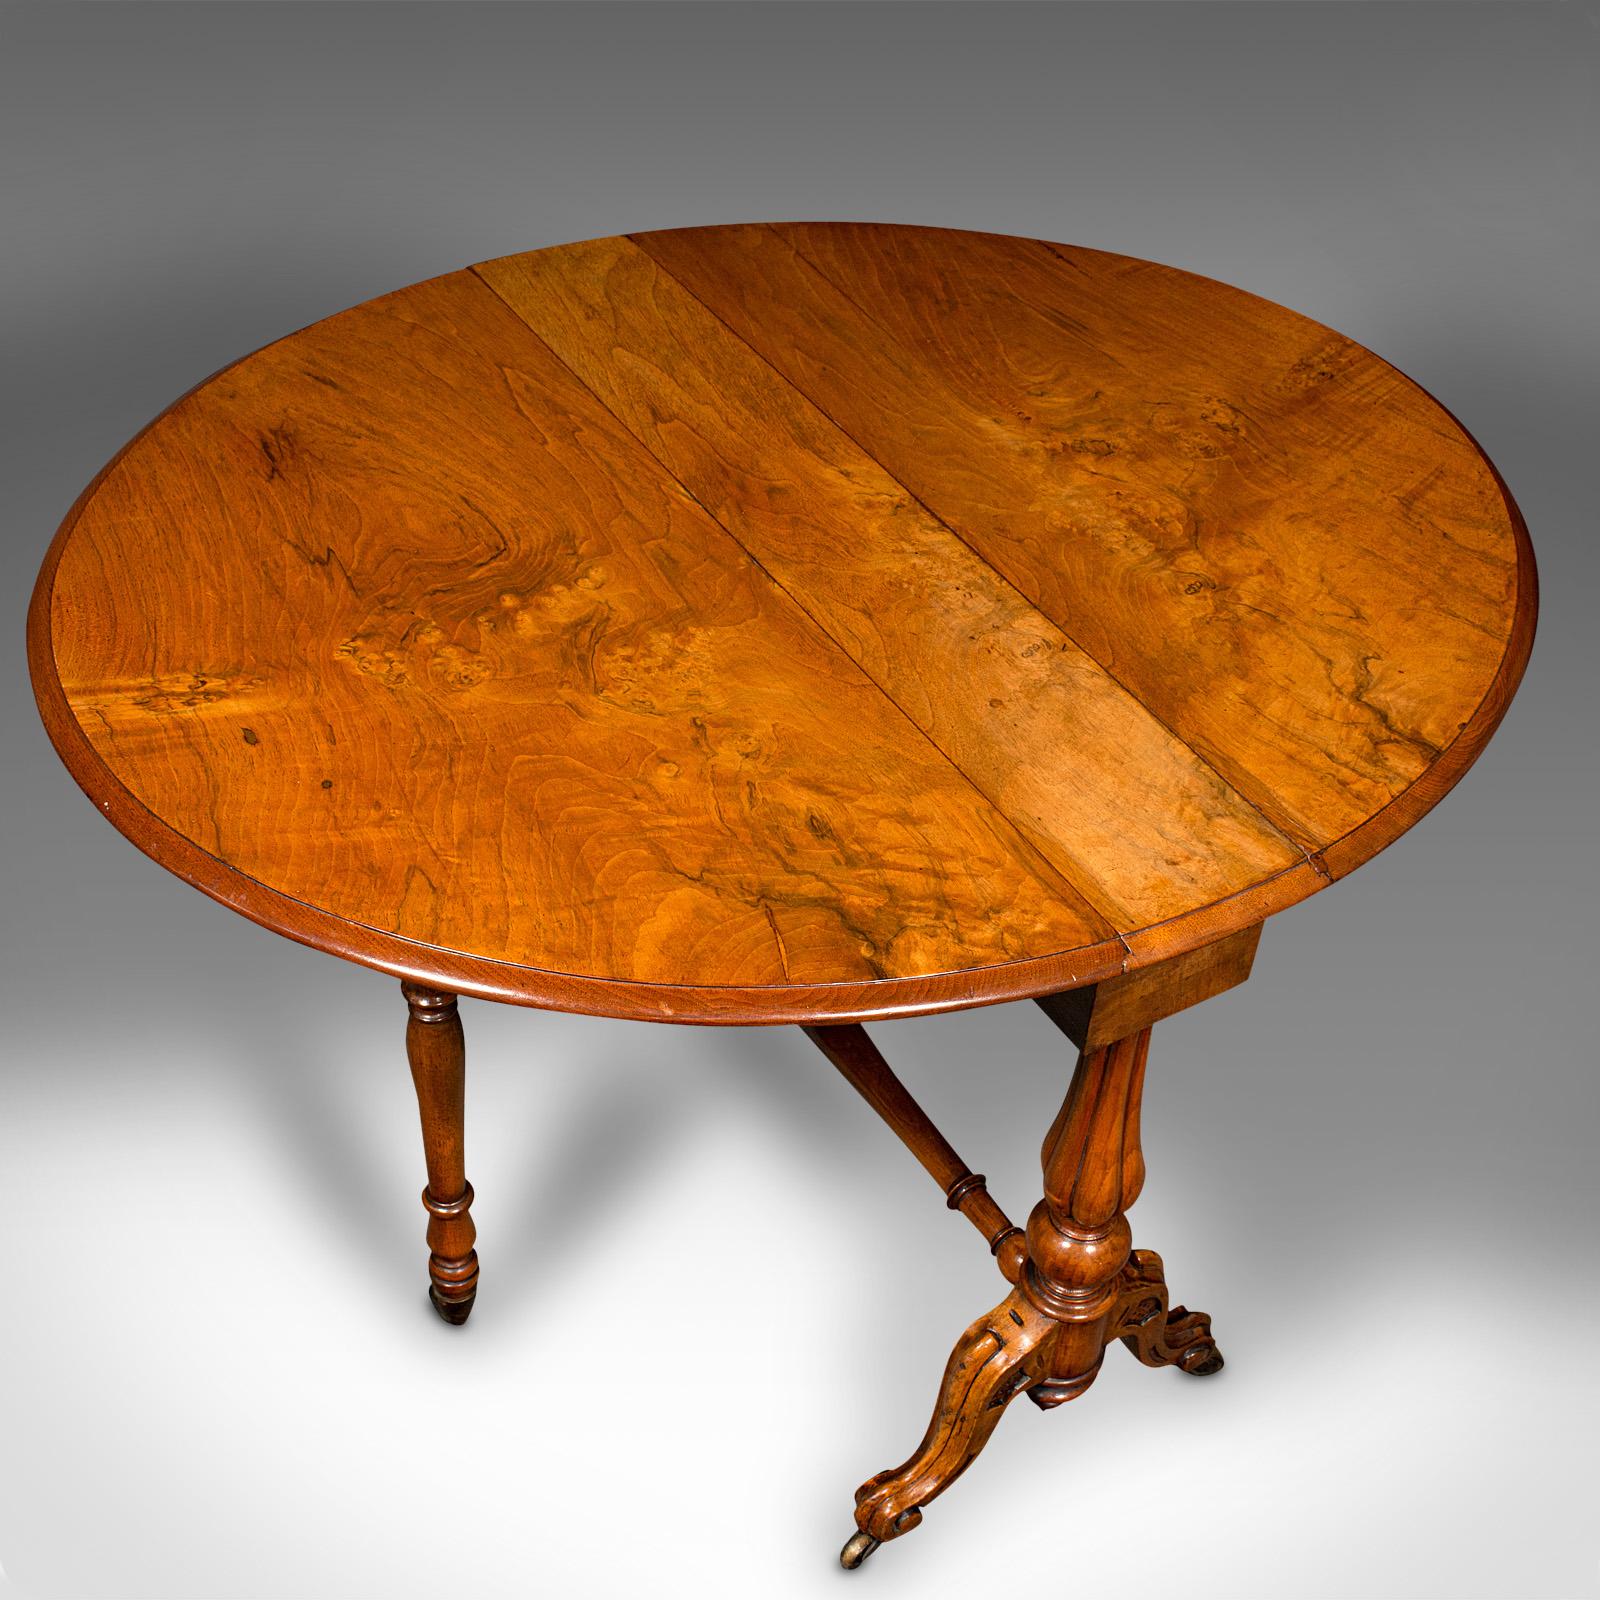 Antique Sutherland Table, English, Burr Walnut, Oval, Occasional, Victorian For Sale 3